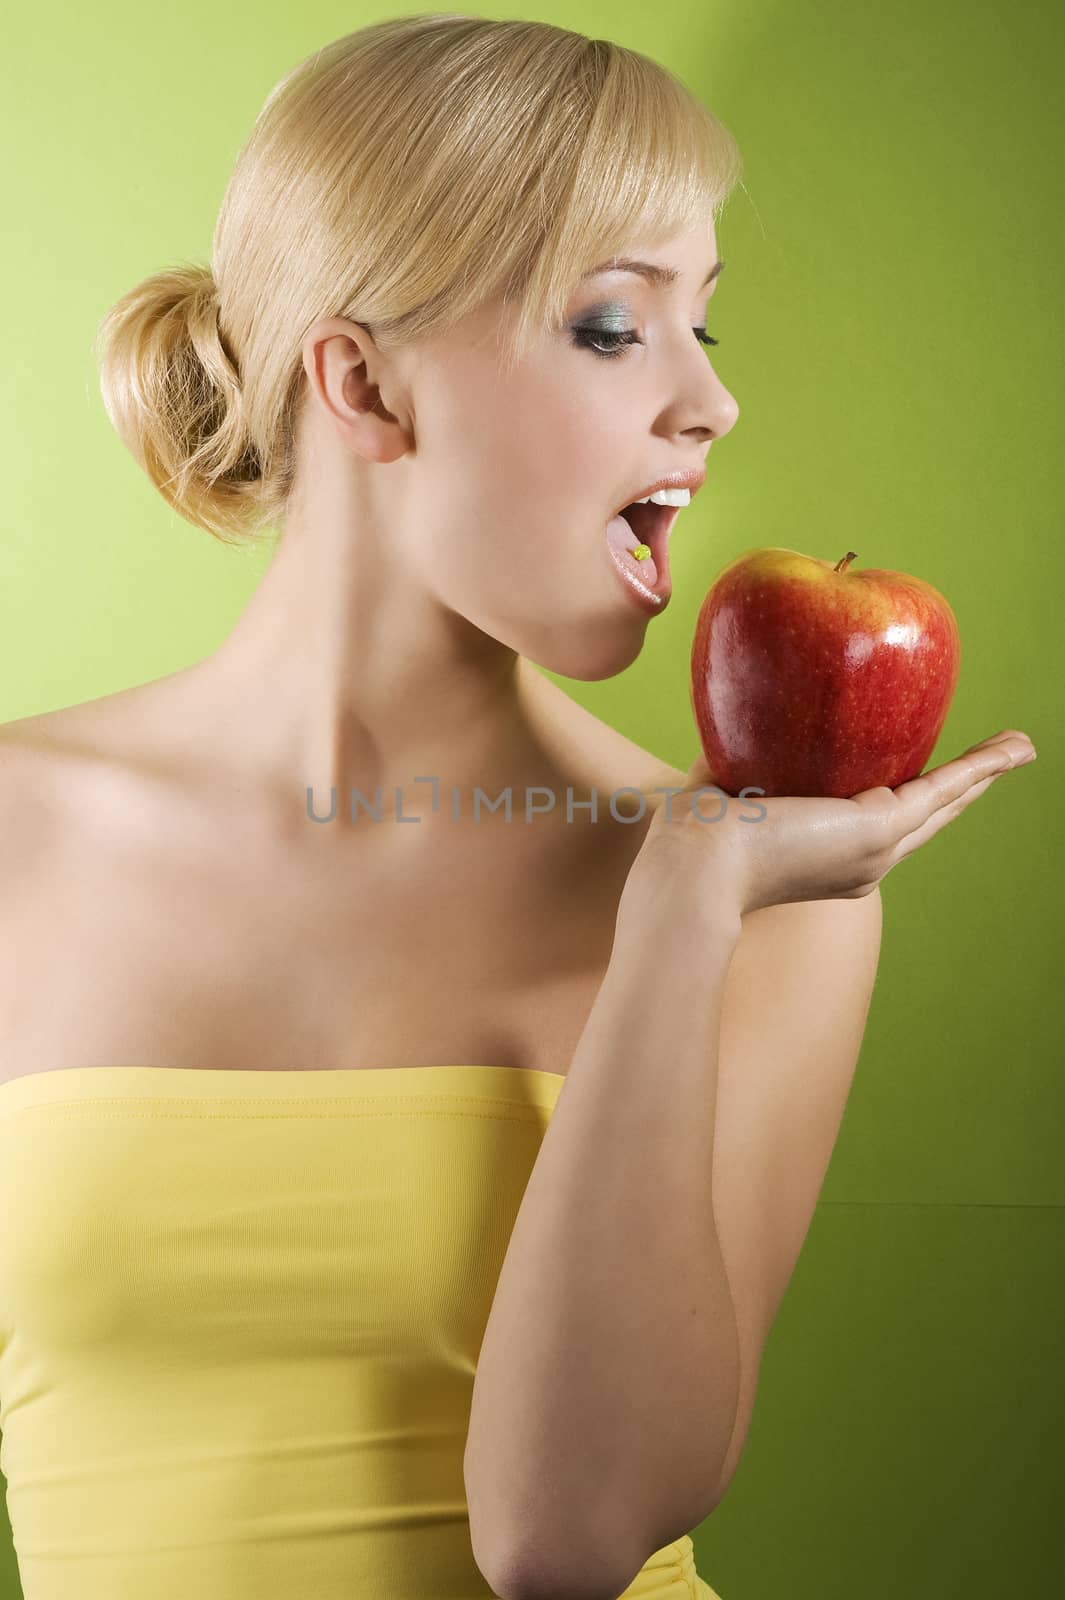 nice shot of a young beautiful woman on colored background in act to eat a red apple